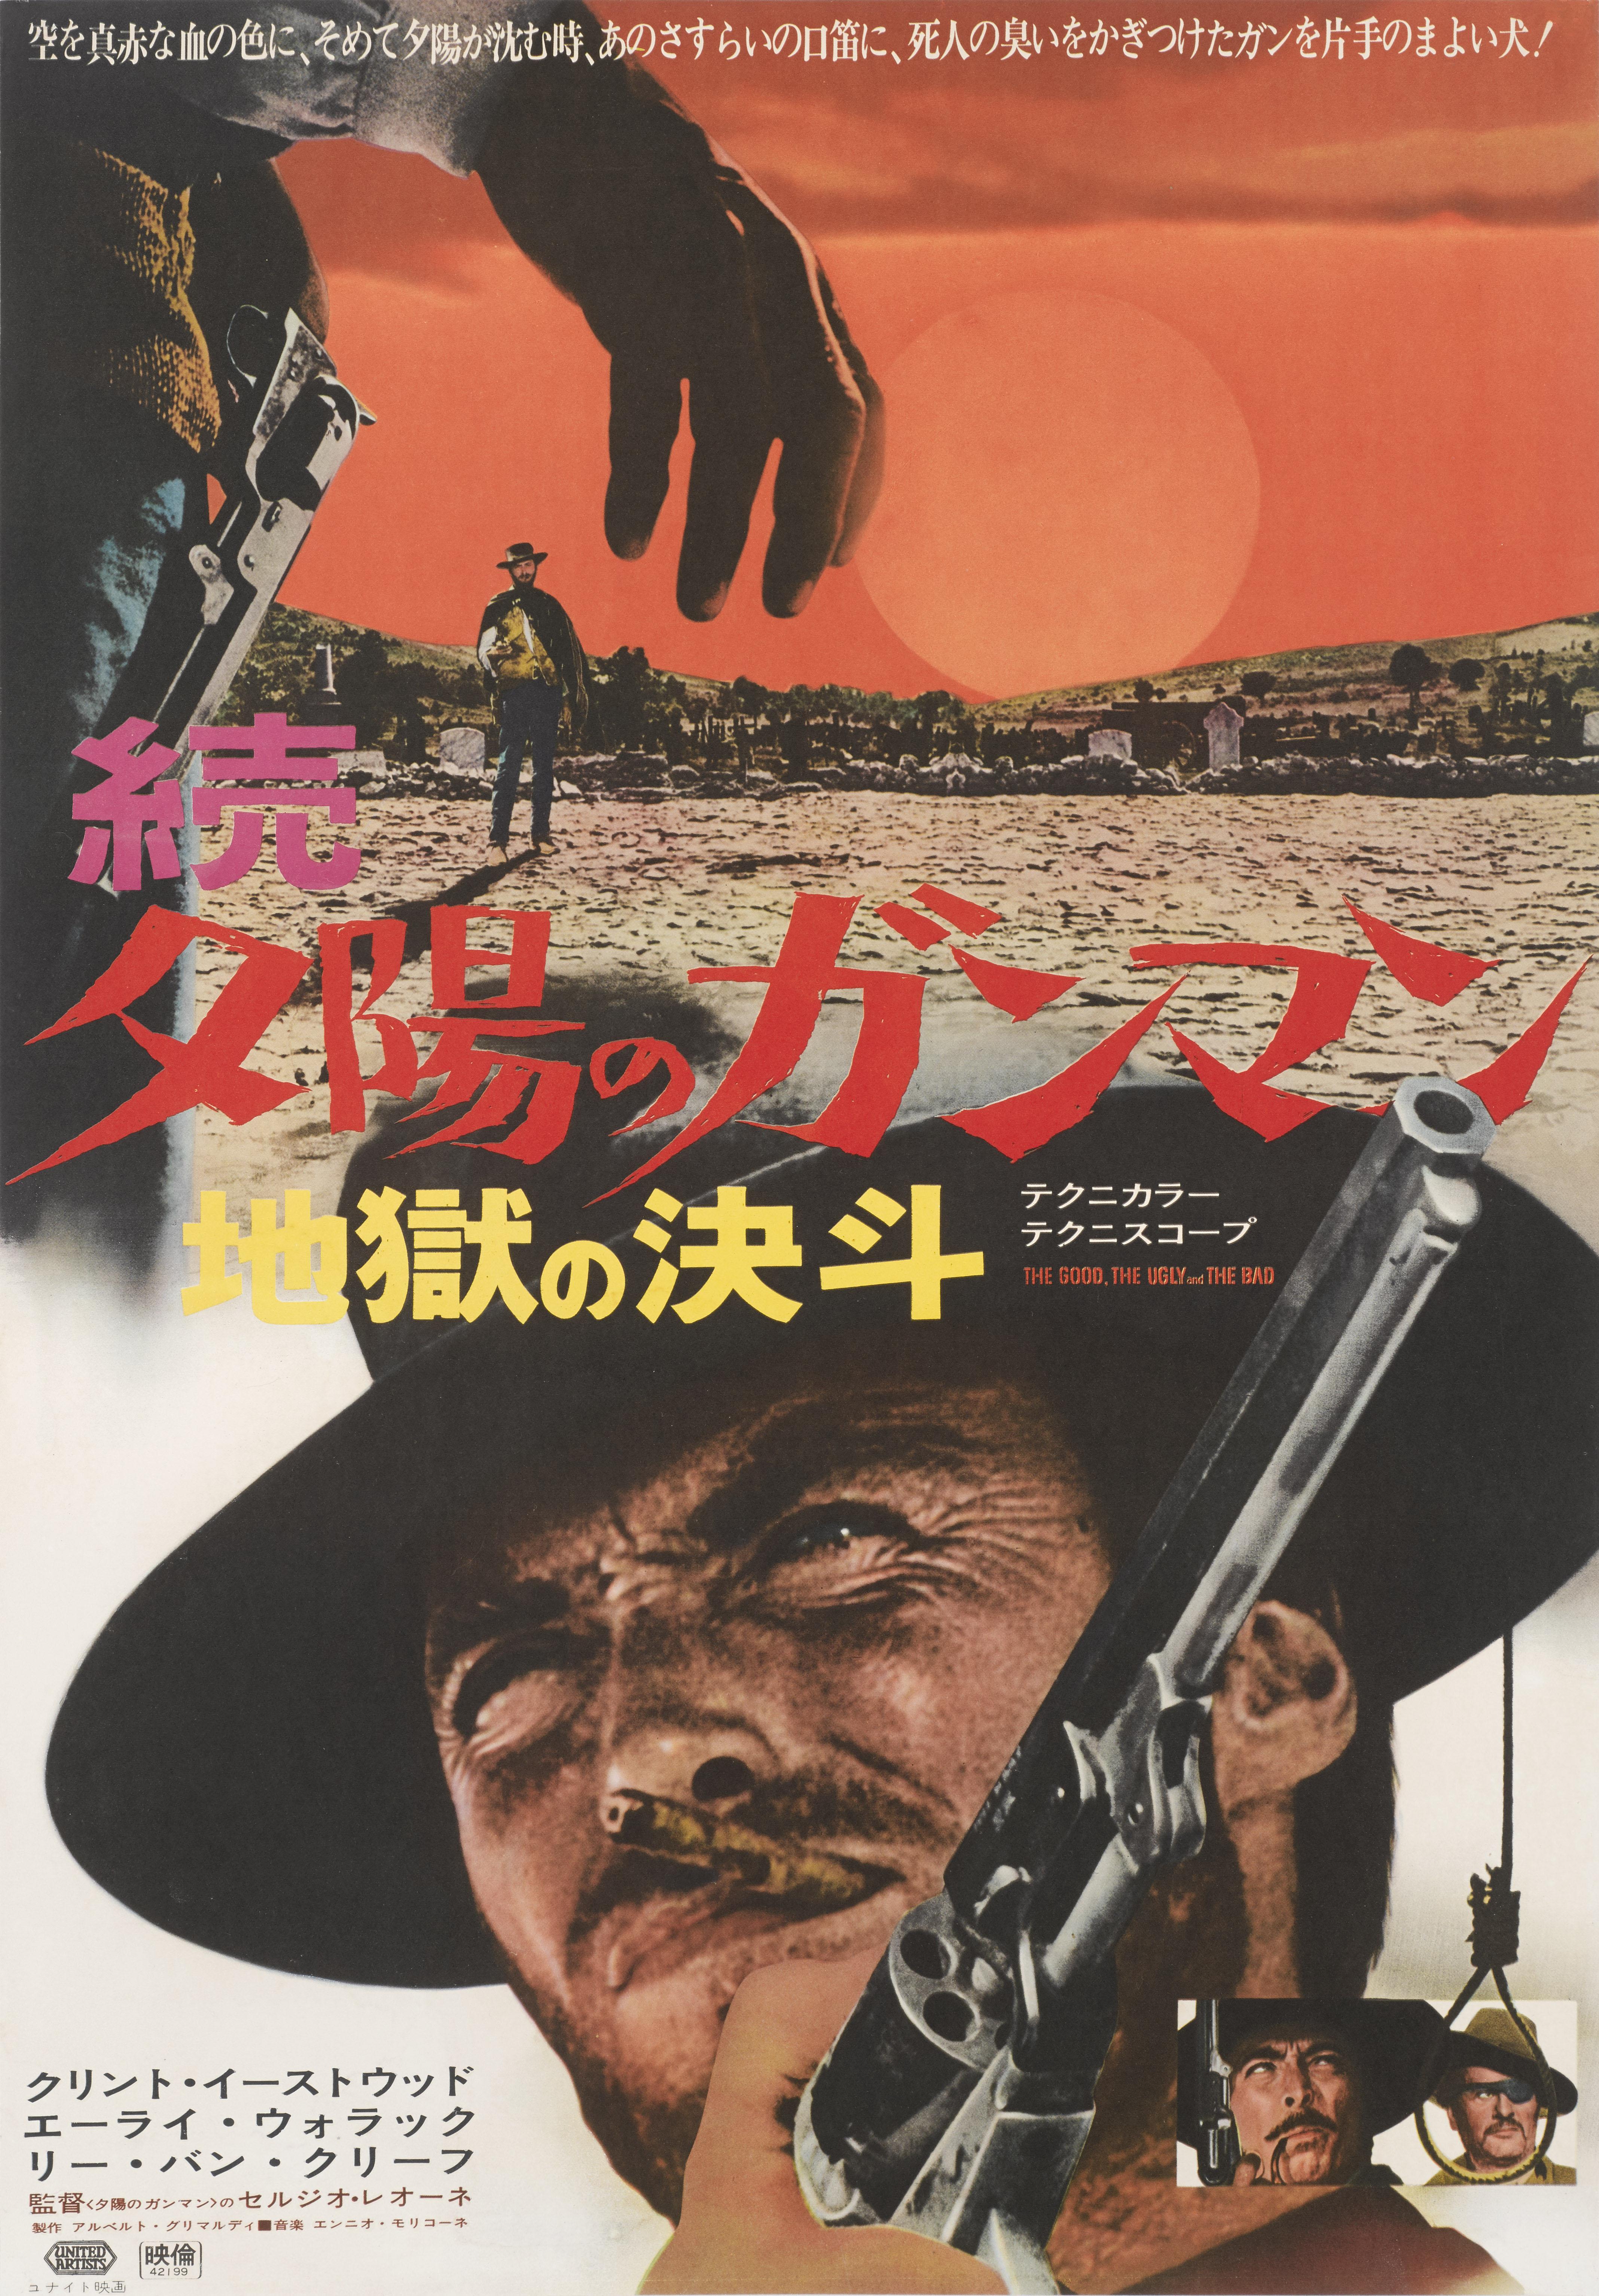 Original Japanese film poster for the 1966 Spaghetti western staring Clint Eastwood, Eli Wallach and Lee Van Cleef, and directed by Sergio Leone. This cool design was created for the films first Japanese release in 1969 .The Good, the Bad and the